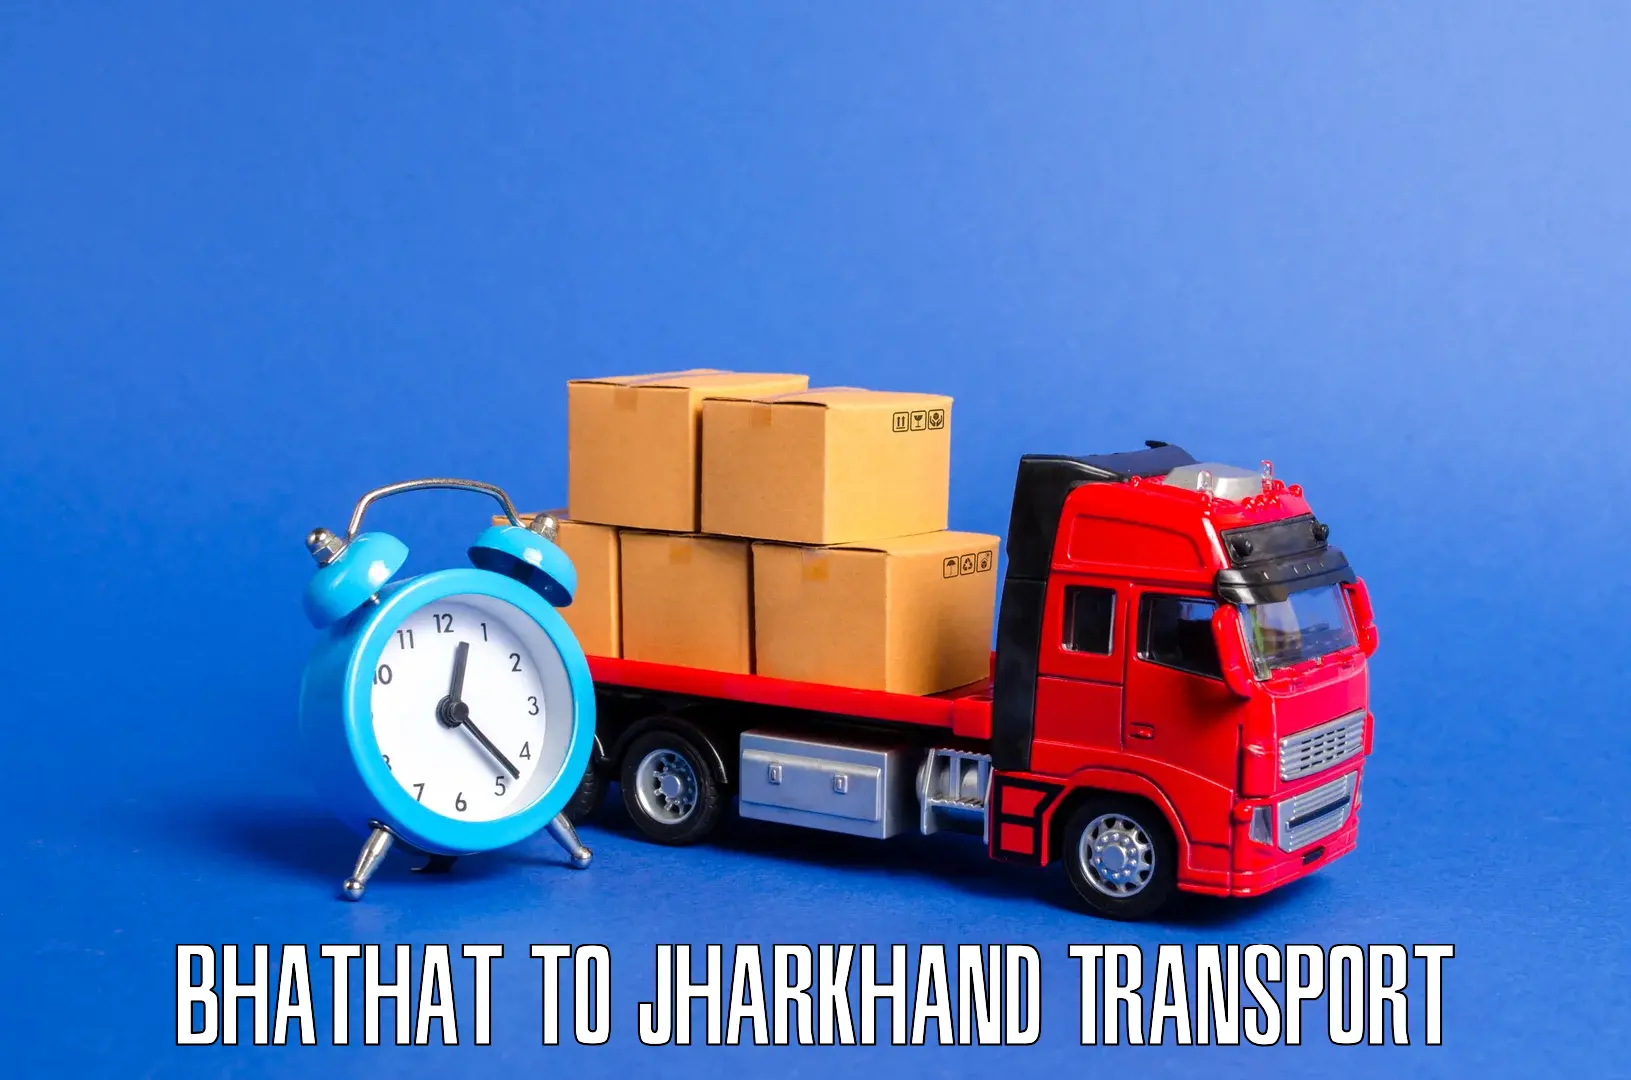 Pick up transport service Bhathat to Peterbar